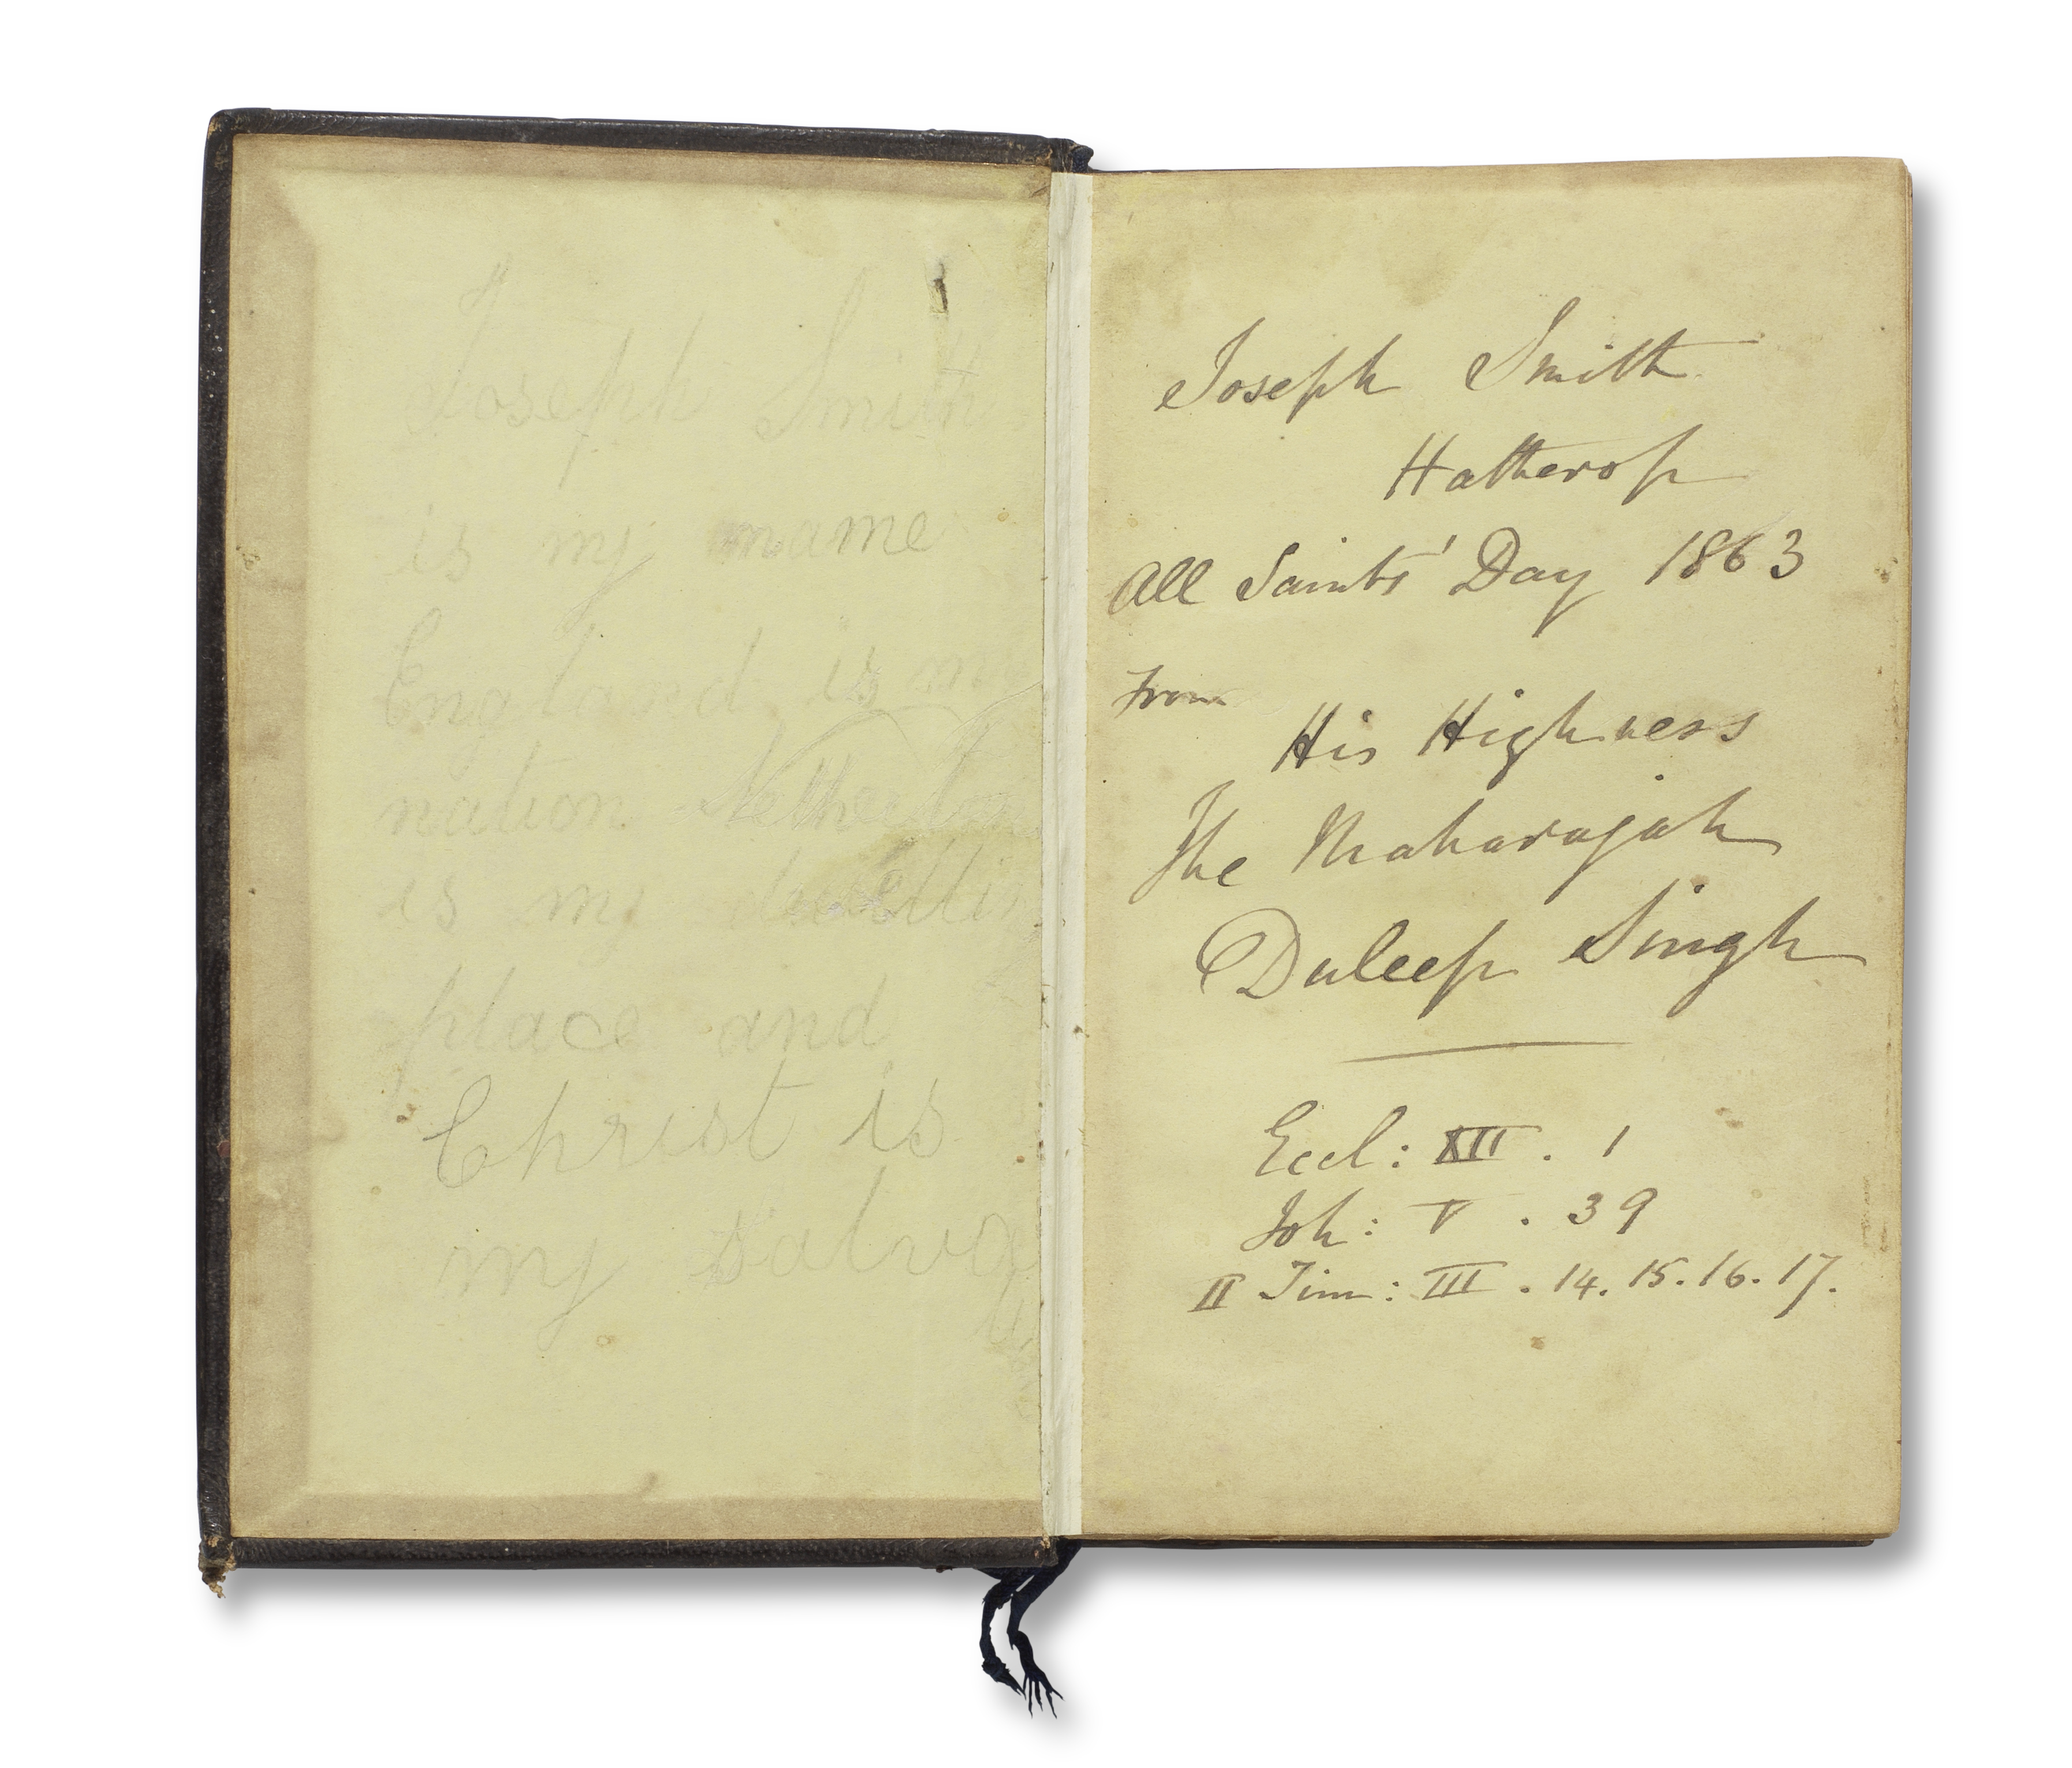 The Holy Bible, presented to Joseph Smith by Maharajah Duleep Singh on All Saints' Day 1863, and...